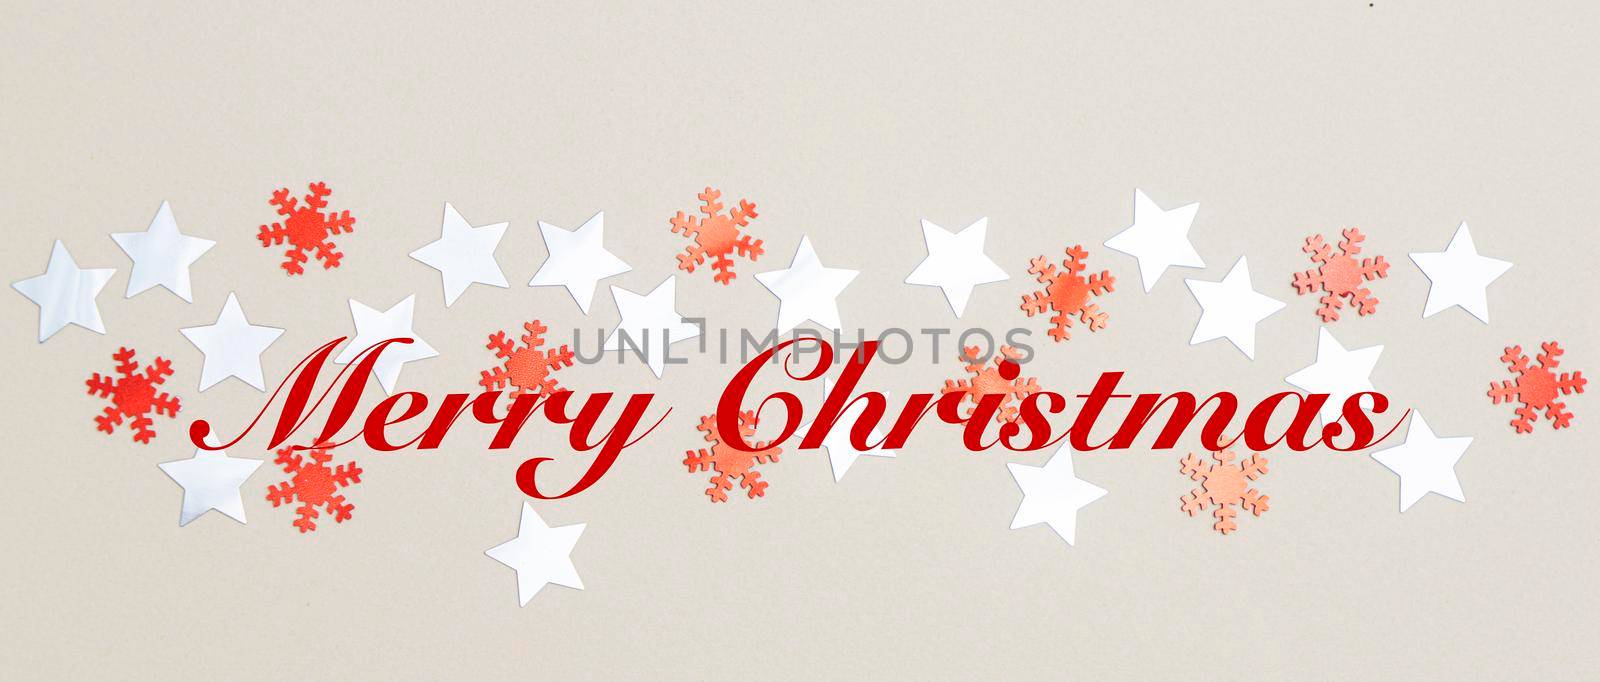 christmas facebook decorated cover